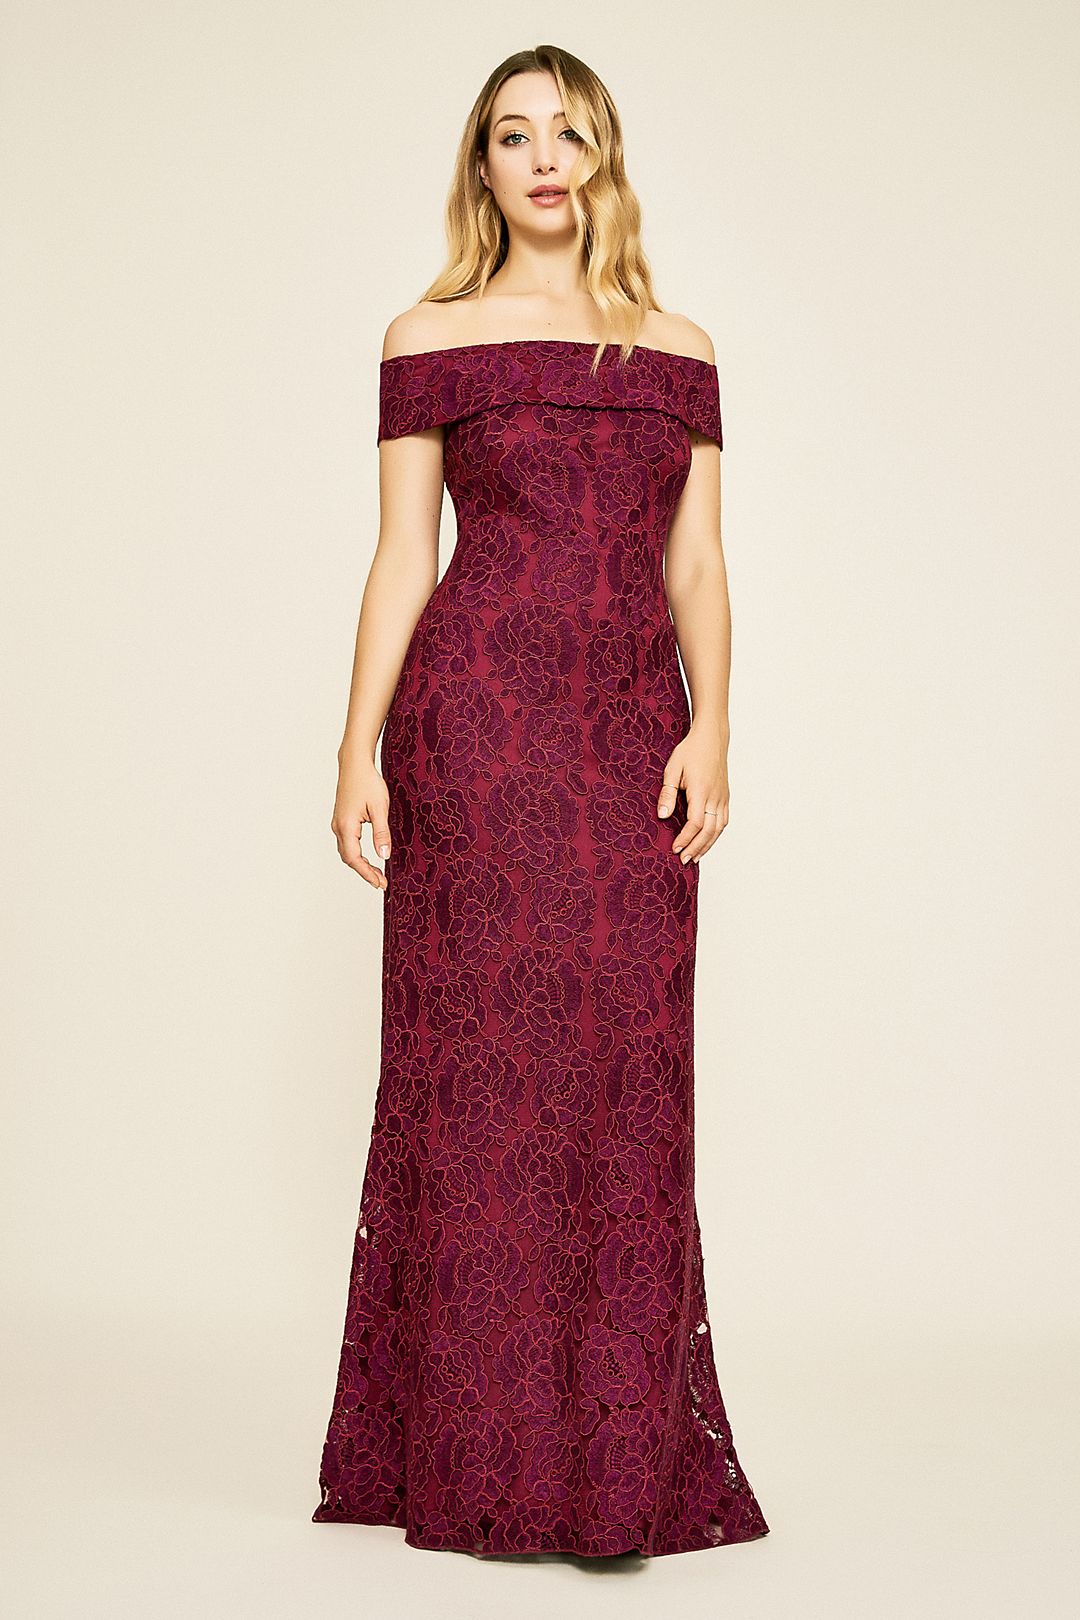 Sangria Embroidered Lace Off-the-Shoulder Gown Image 4